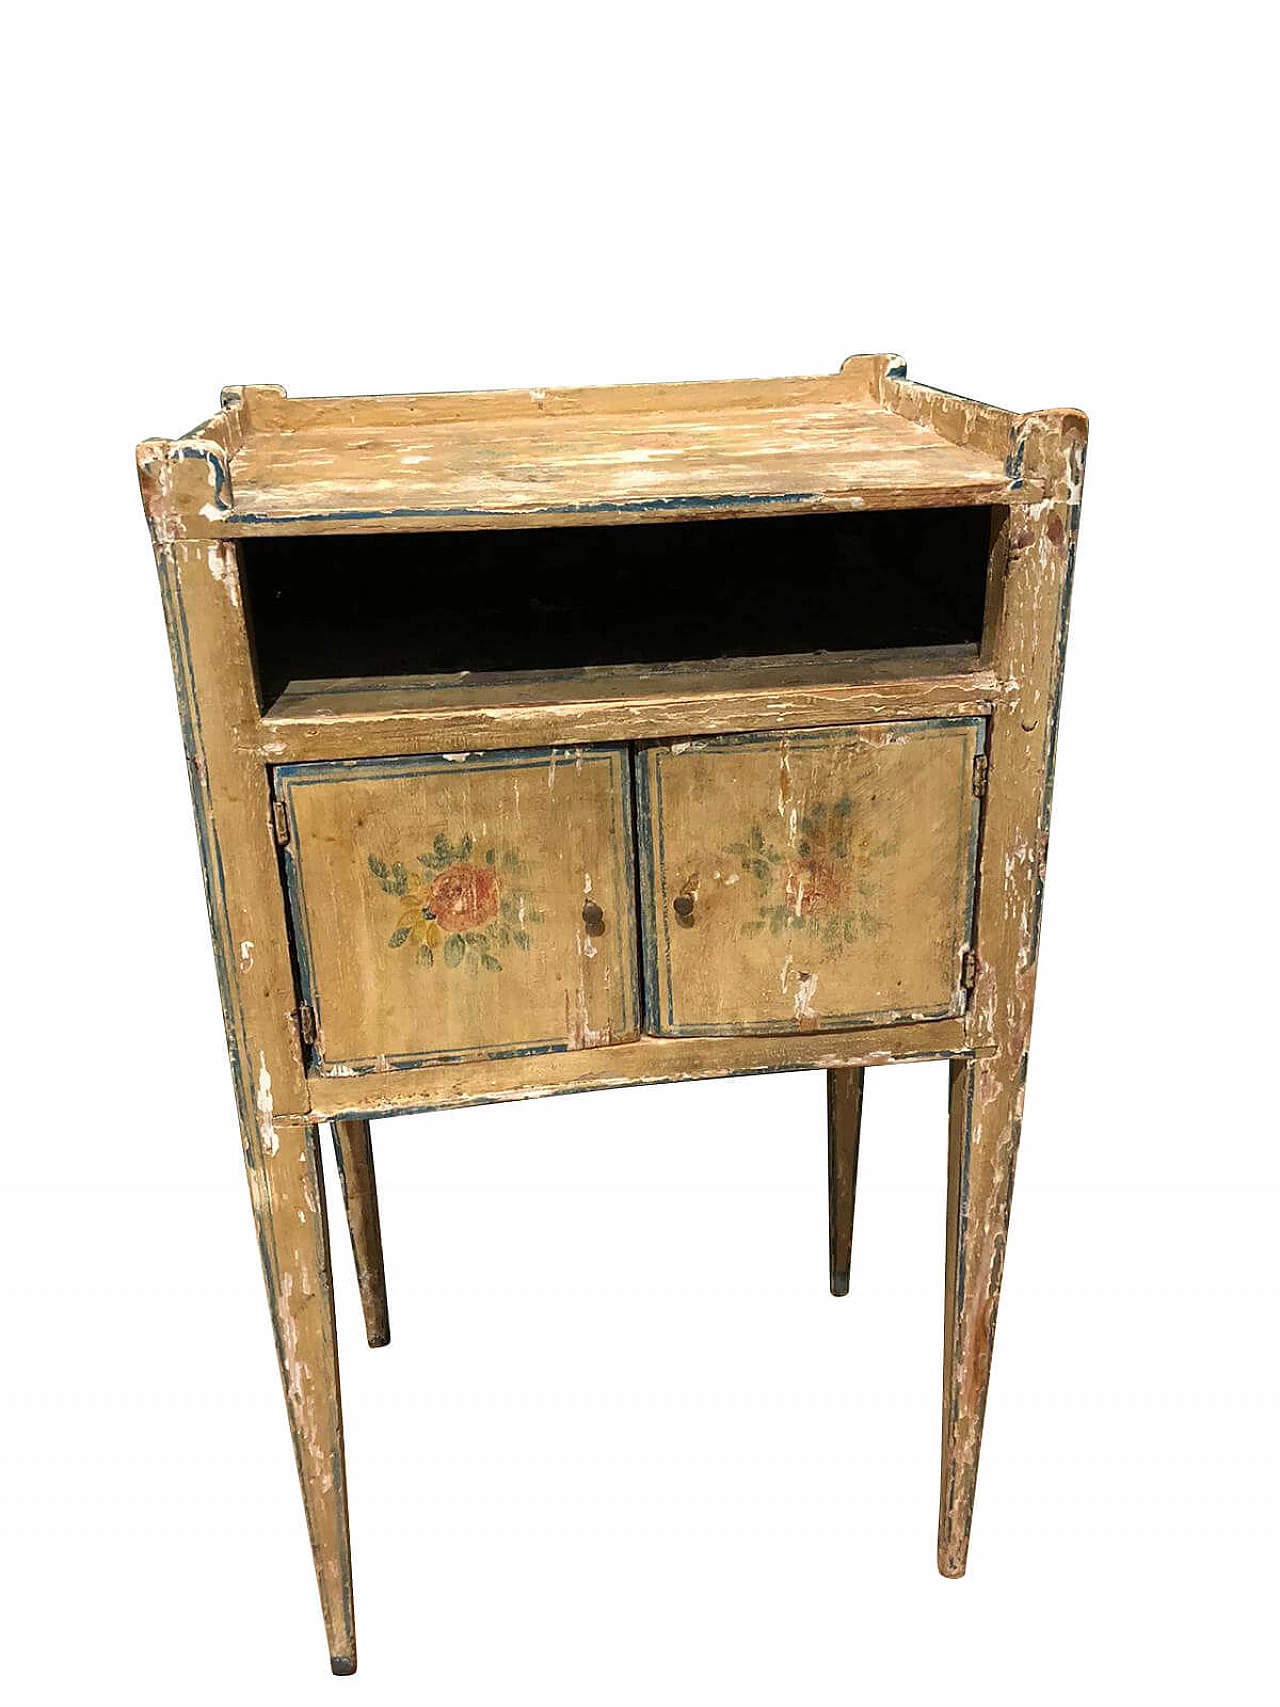 Wooden side table, 18th century 1155445